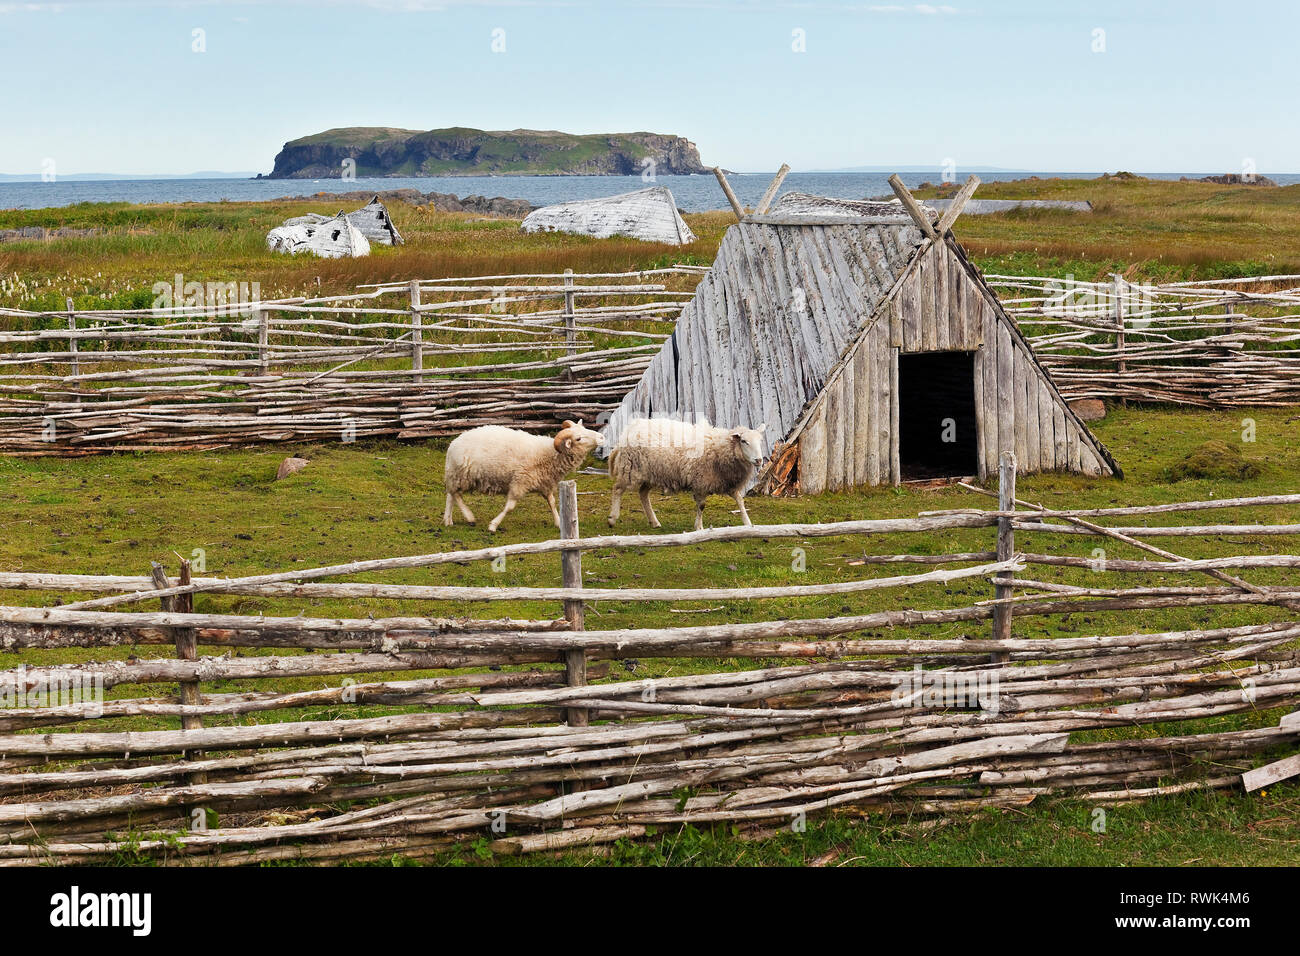 Two sheep in a post-and-rail enclosure at Norstead Viking Village and Port of Trade, L'Anse aux Meadows, Newfoundland, Canada. In the background is the Atlantic Ocean Stock Photo